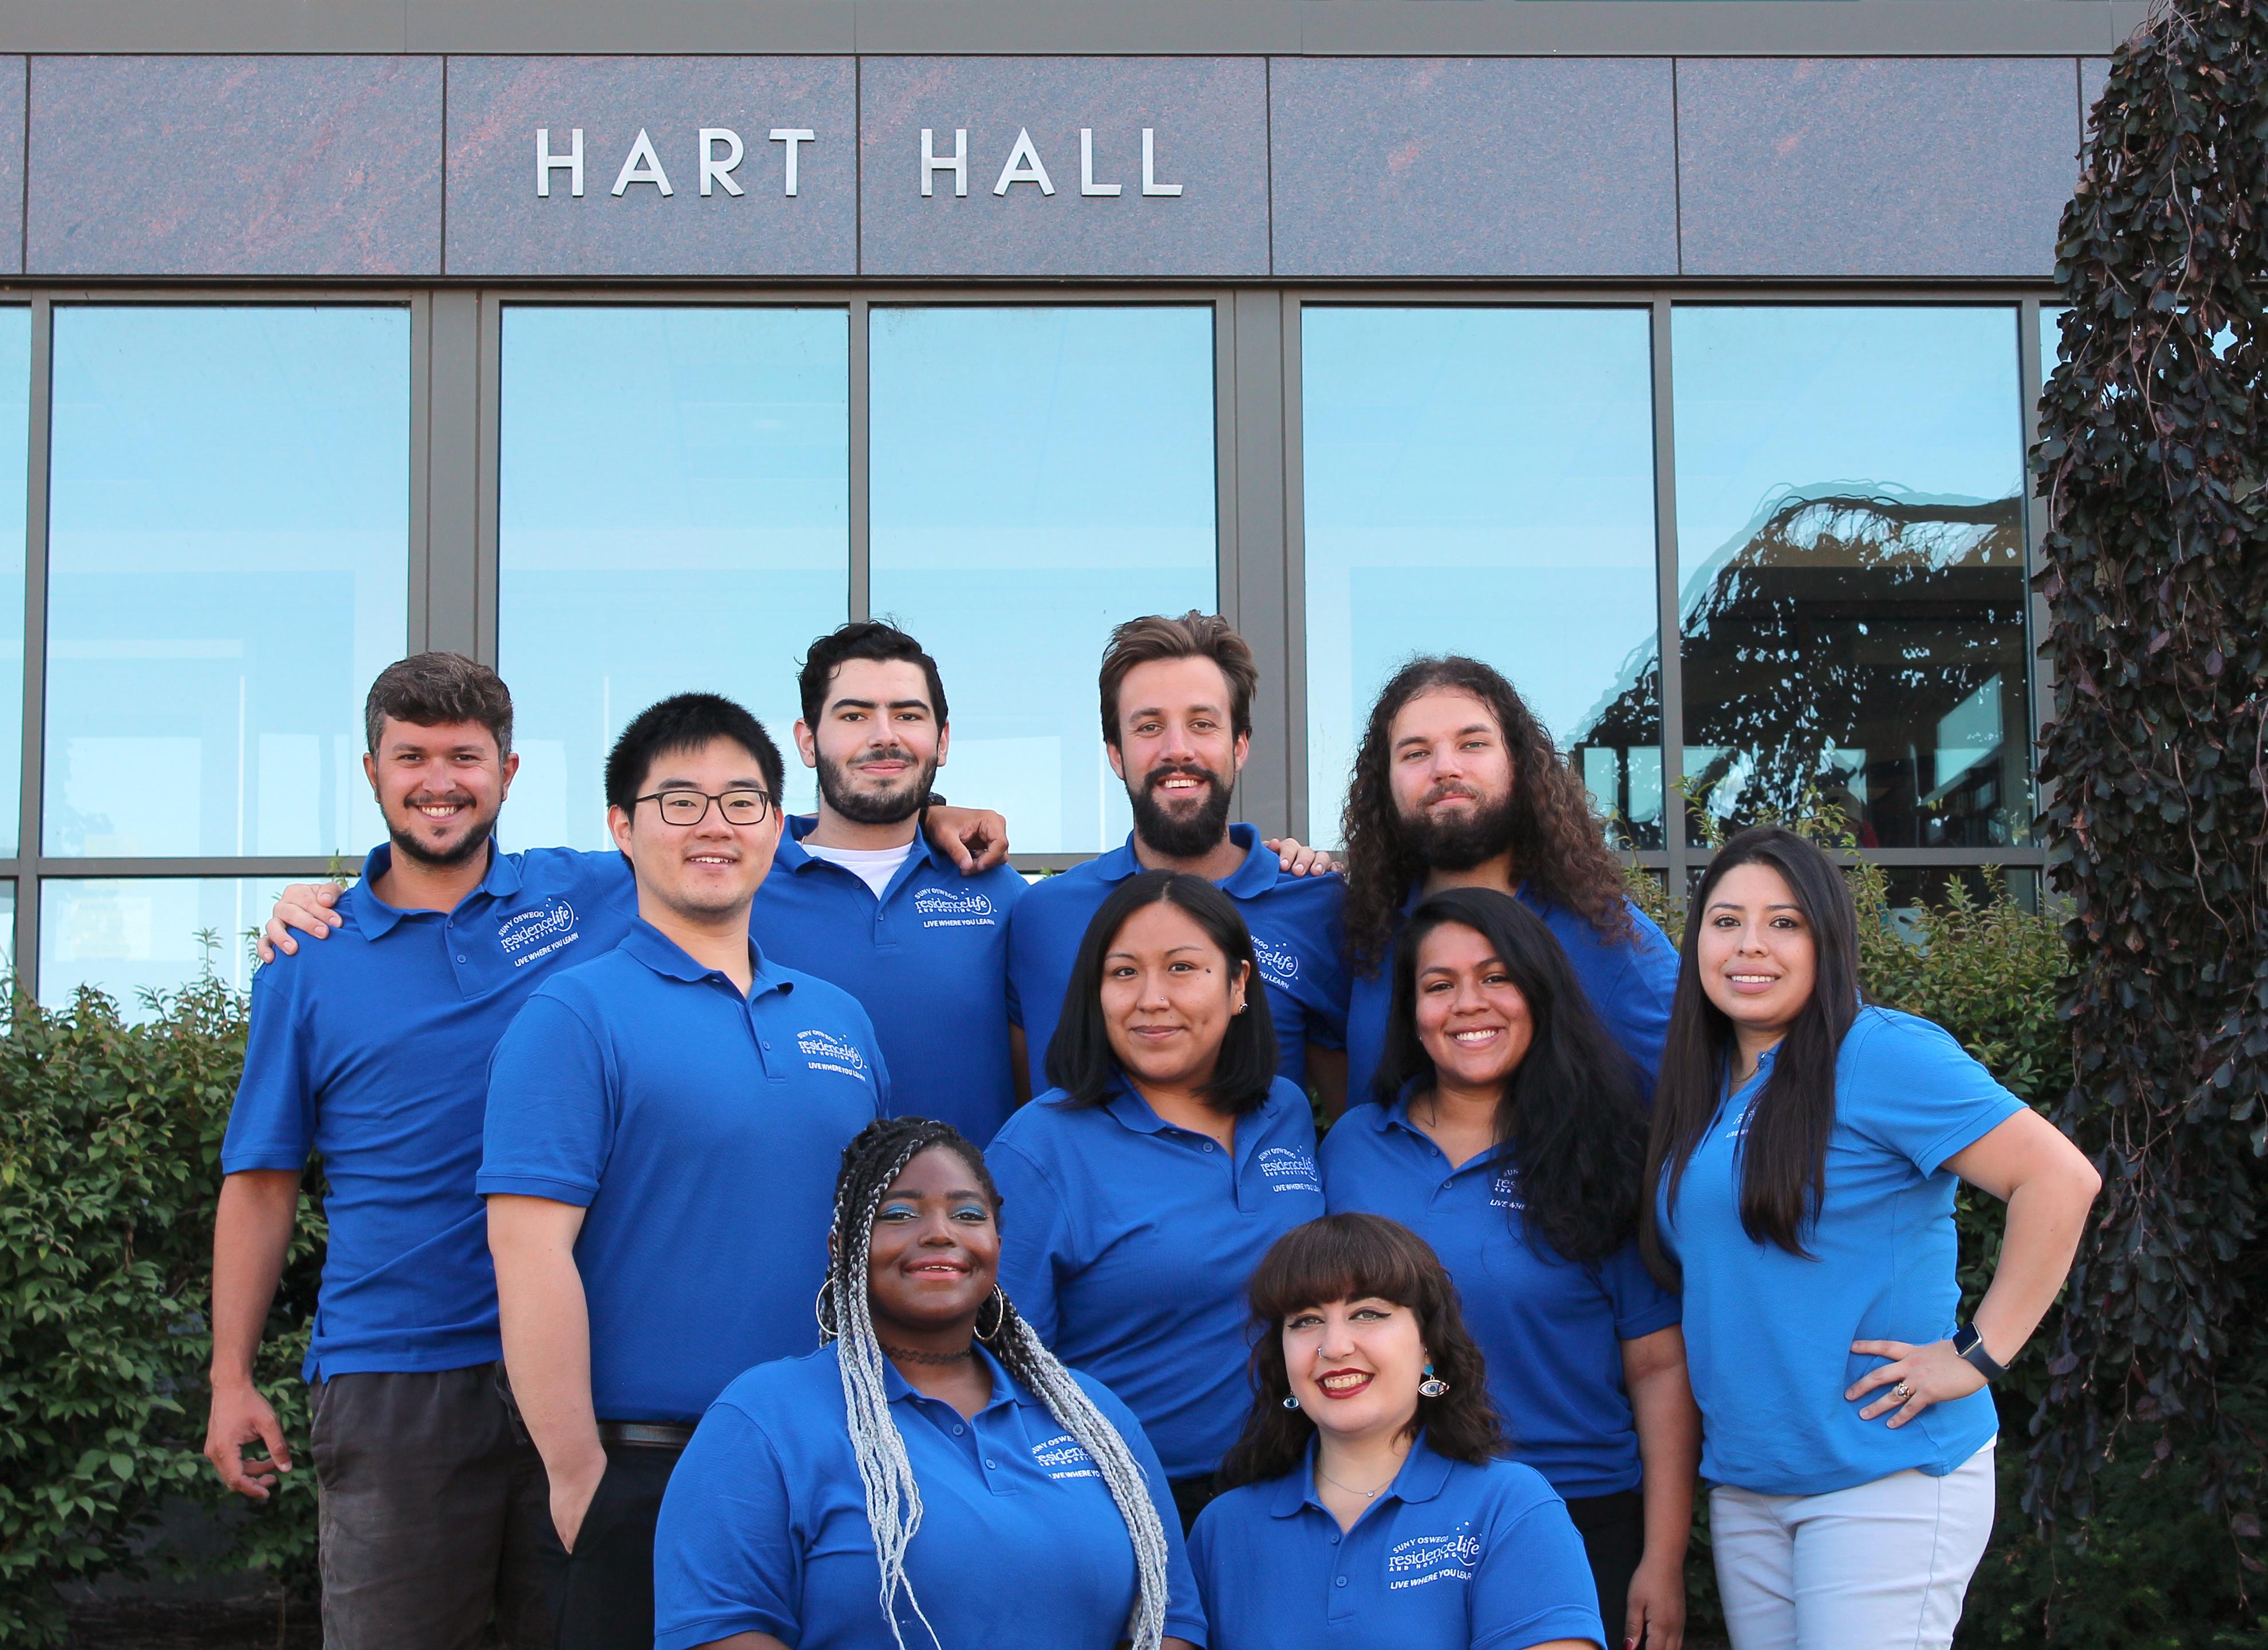 Hart Hall Resident Student Staff group photo. We're ready to welcome you!